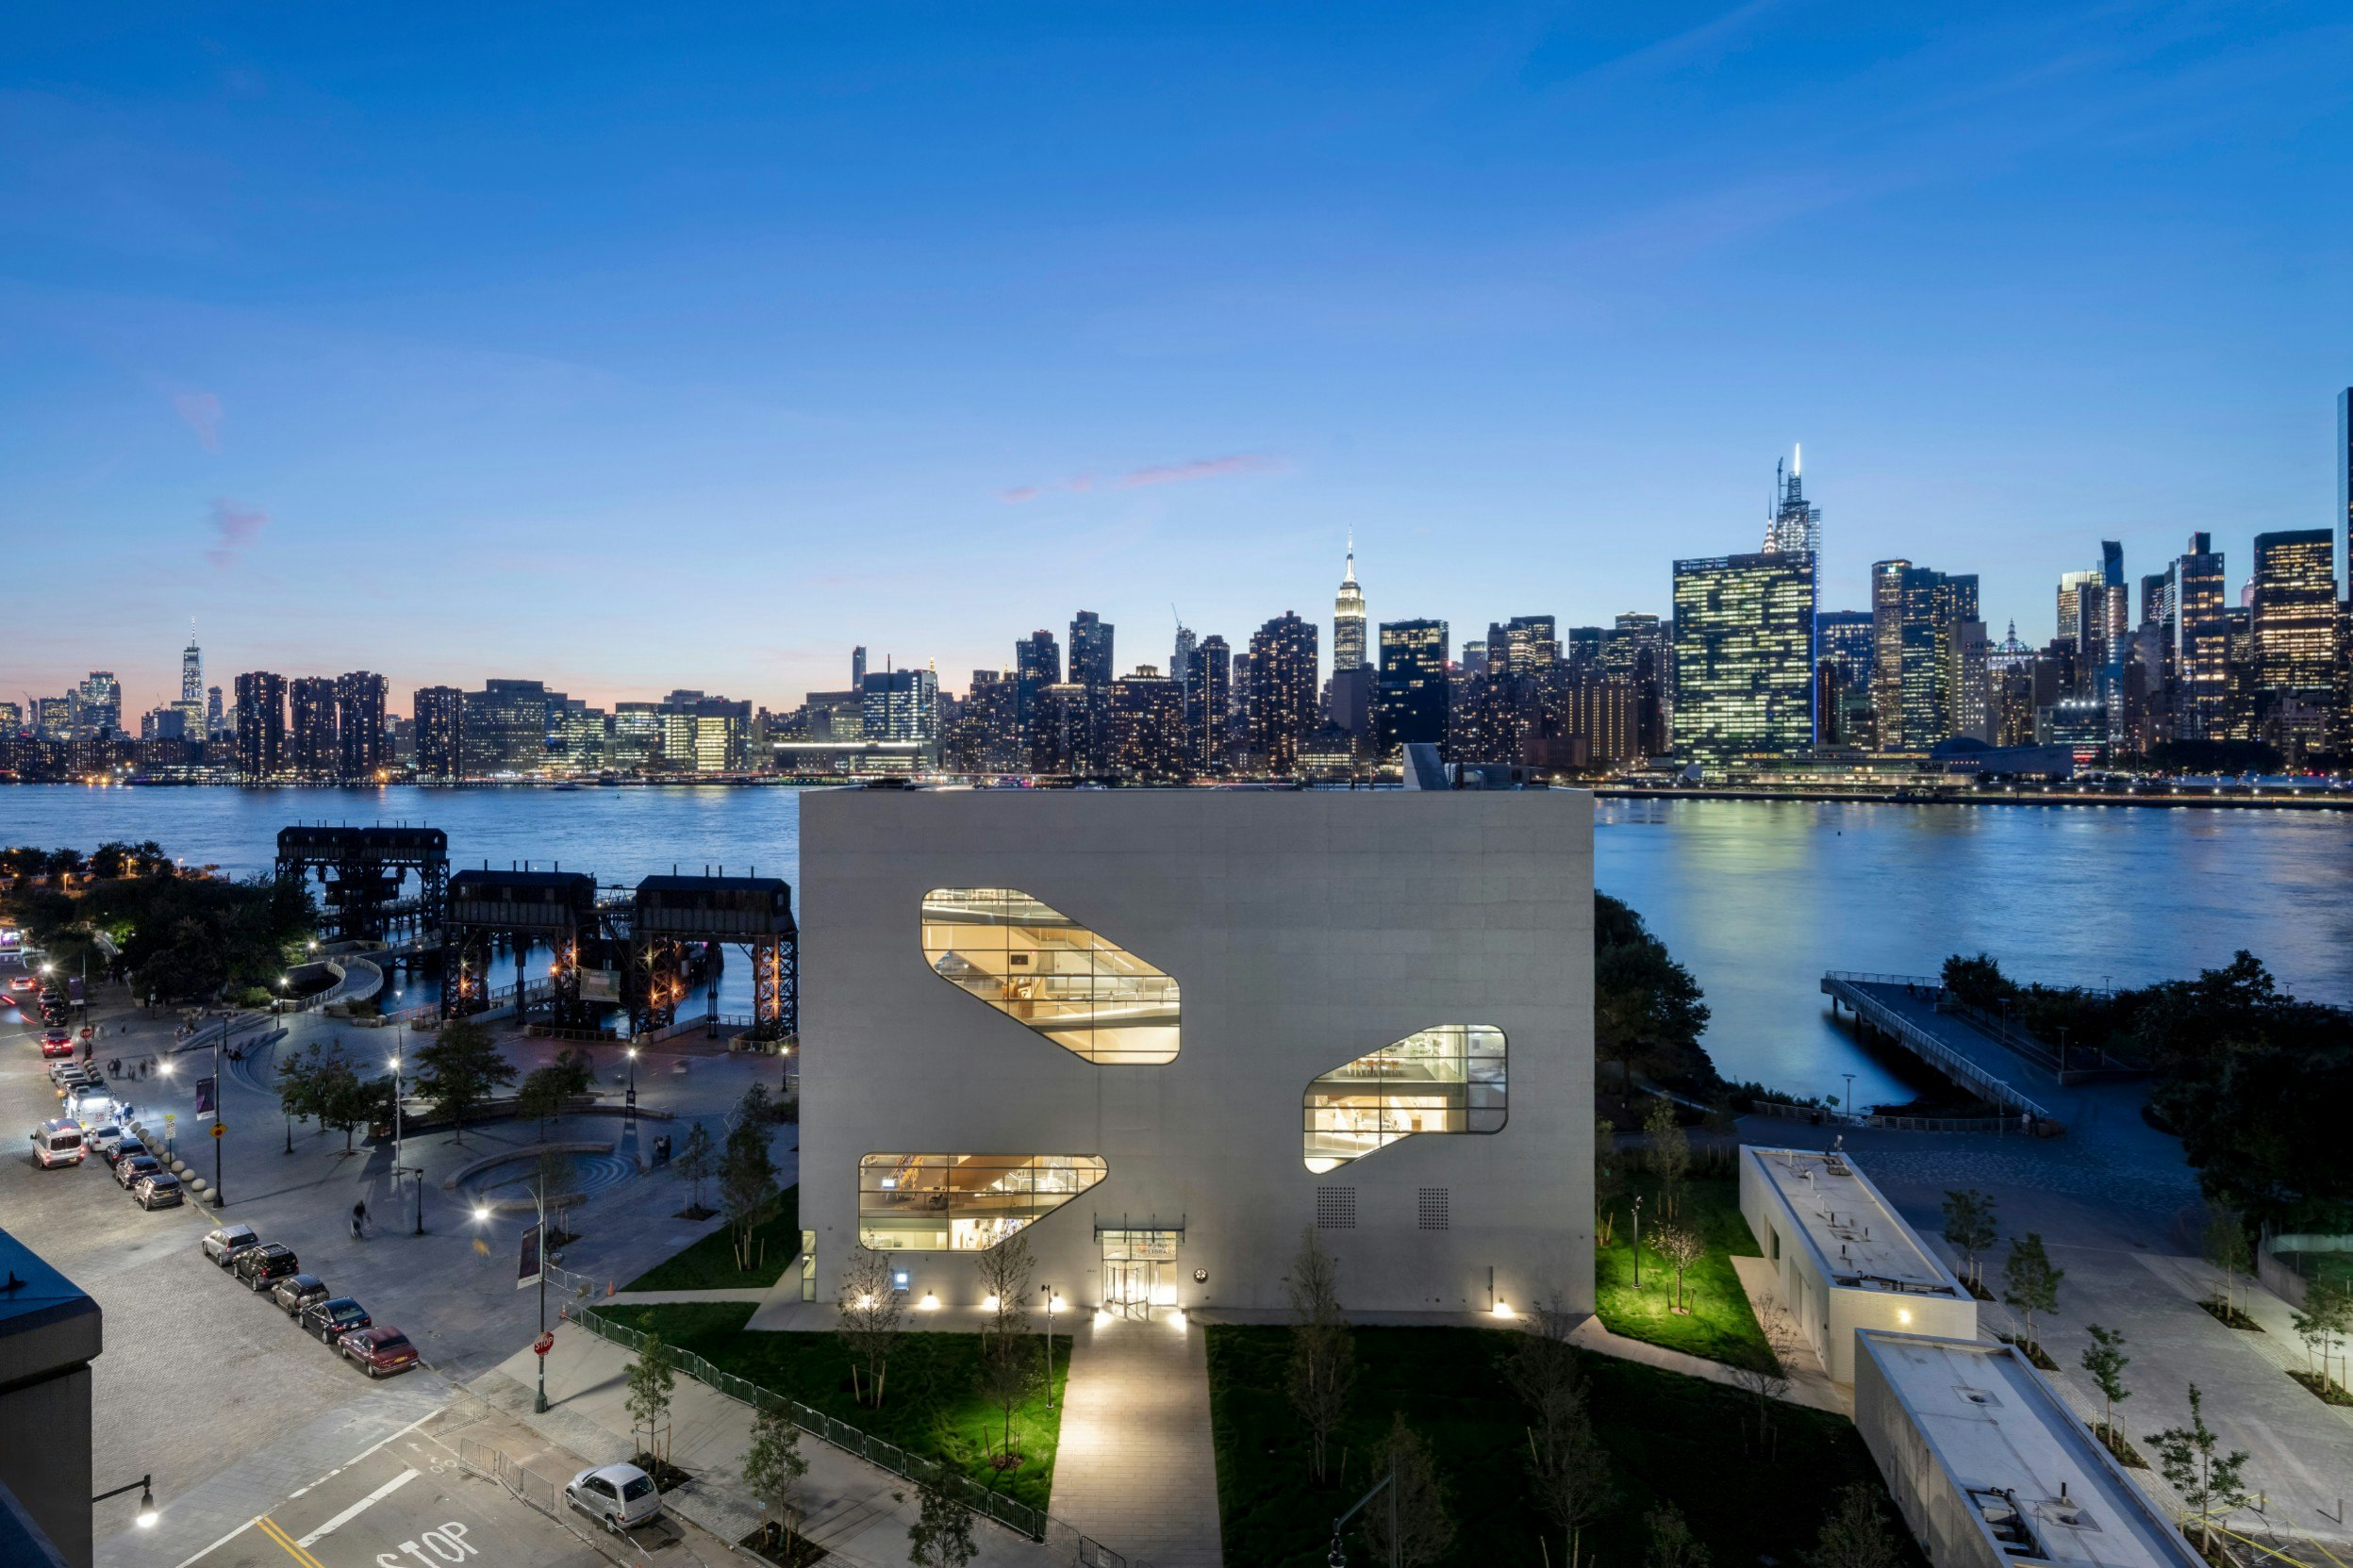 A view of Hunters Point Community Library and the Manhattan skyline